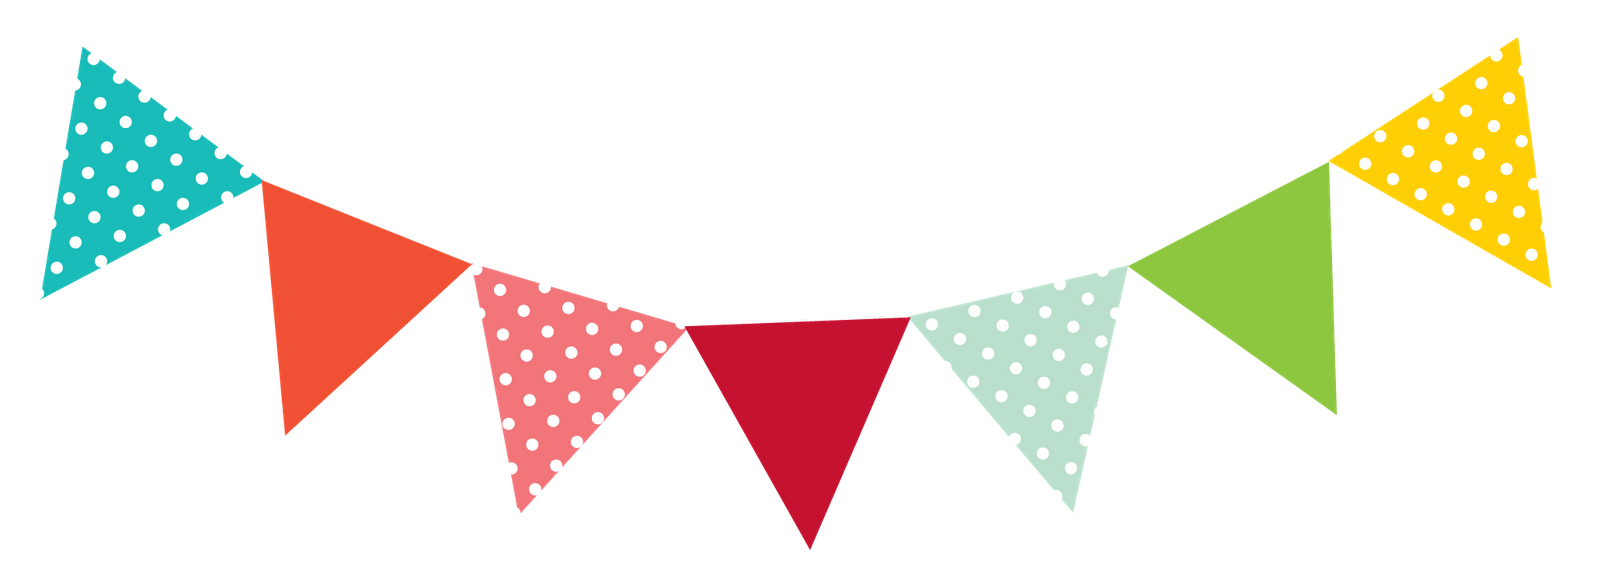 High Resolution Wallpaper | Bunting 1600x587 px